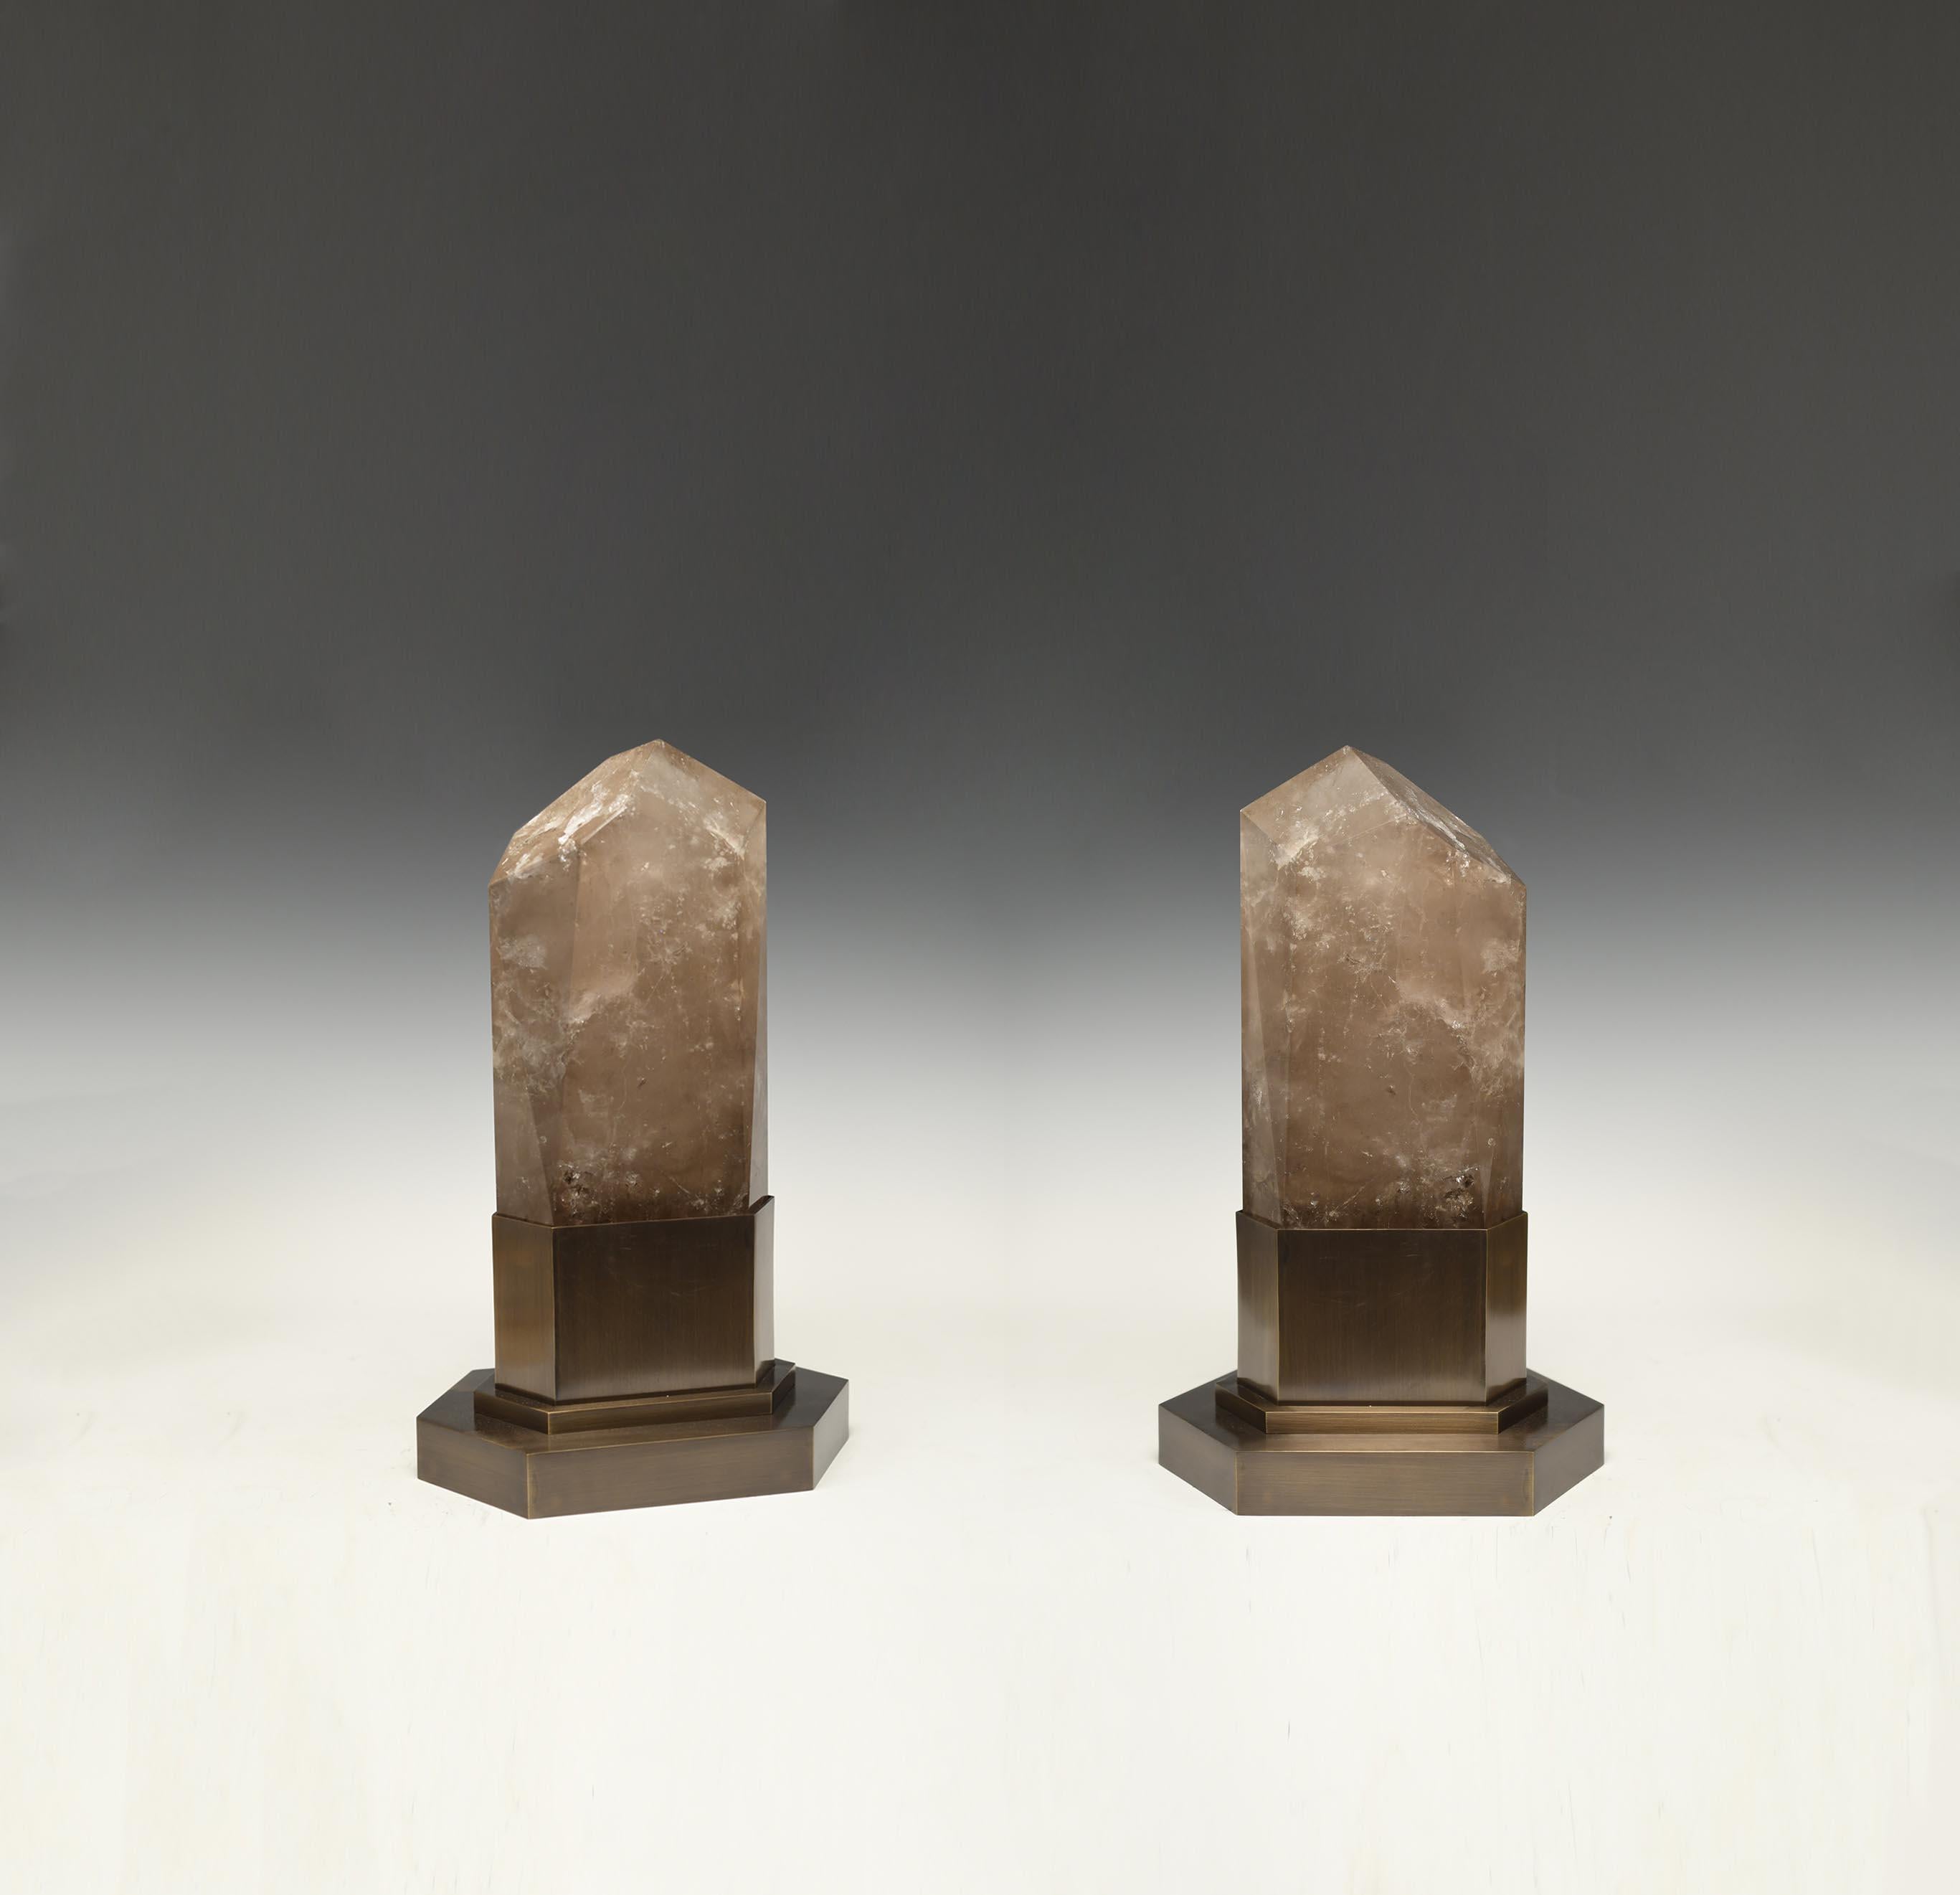 A pair of smoky rock crystal obelisk lights with antique brass bases. Created by Phoenix Gallery, NYC. 
Two sockets installed. Supply two led warm lights. 120w max.
Custom size available.